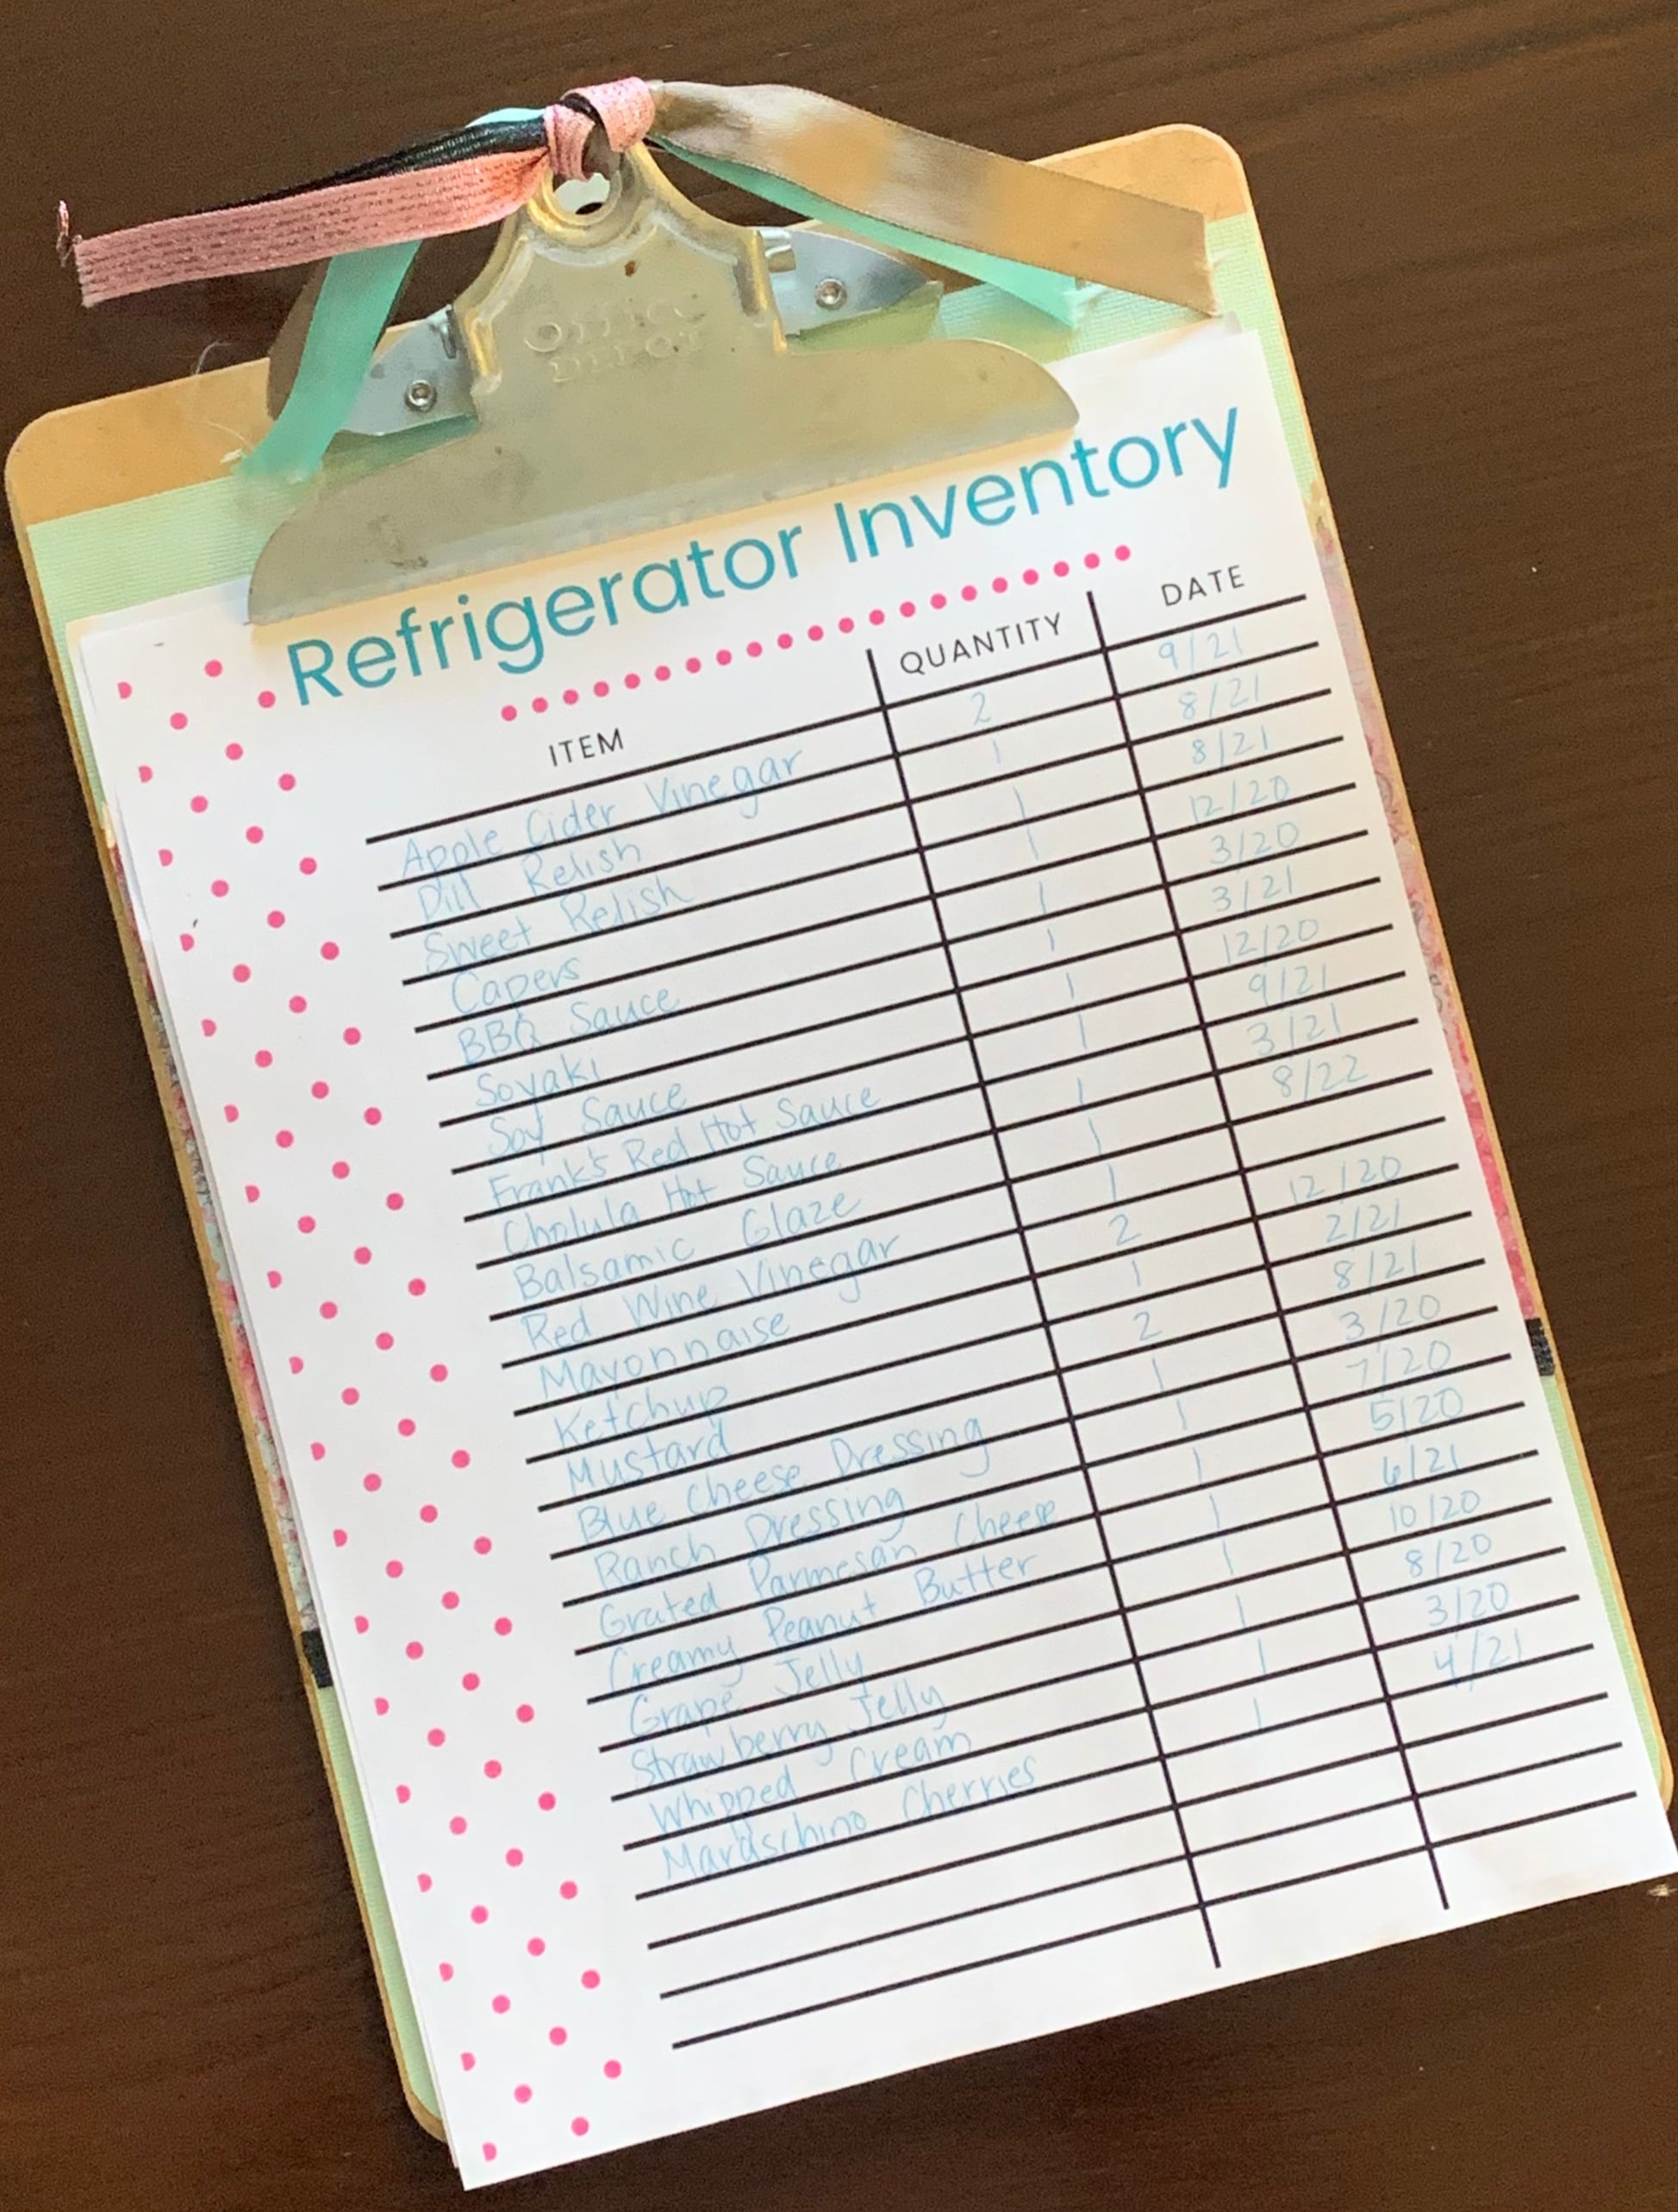 Refrigerator inventory on a clipboard